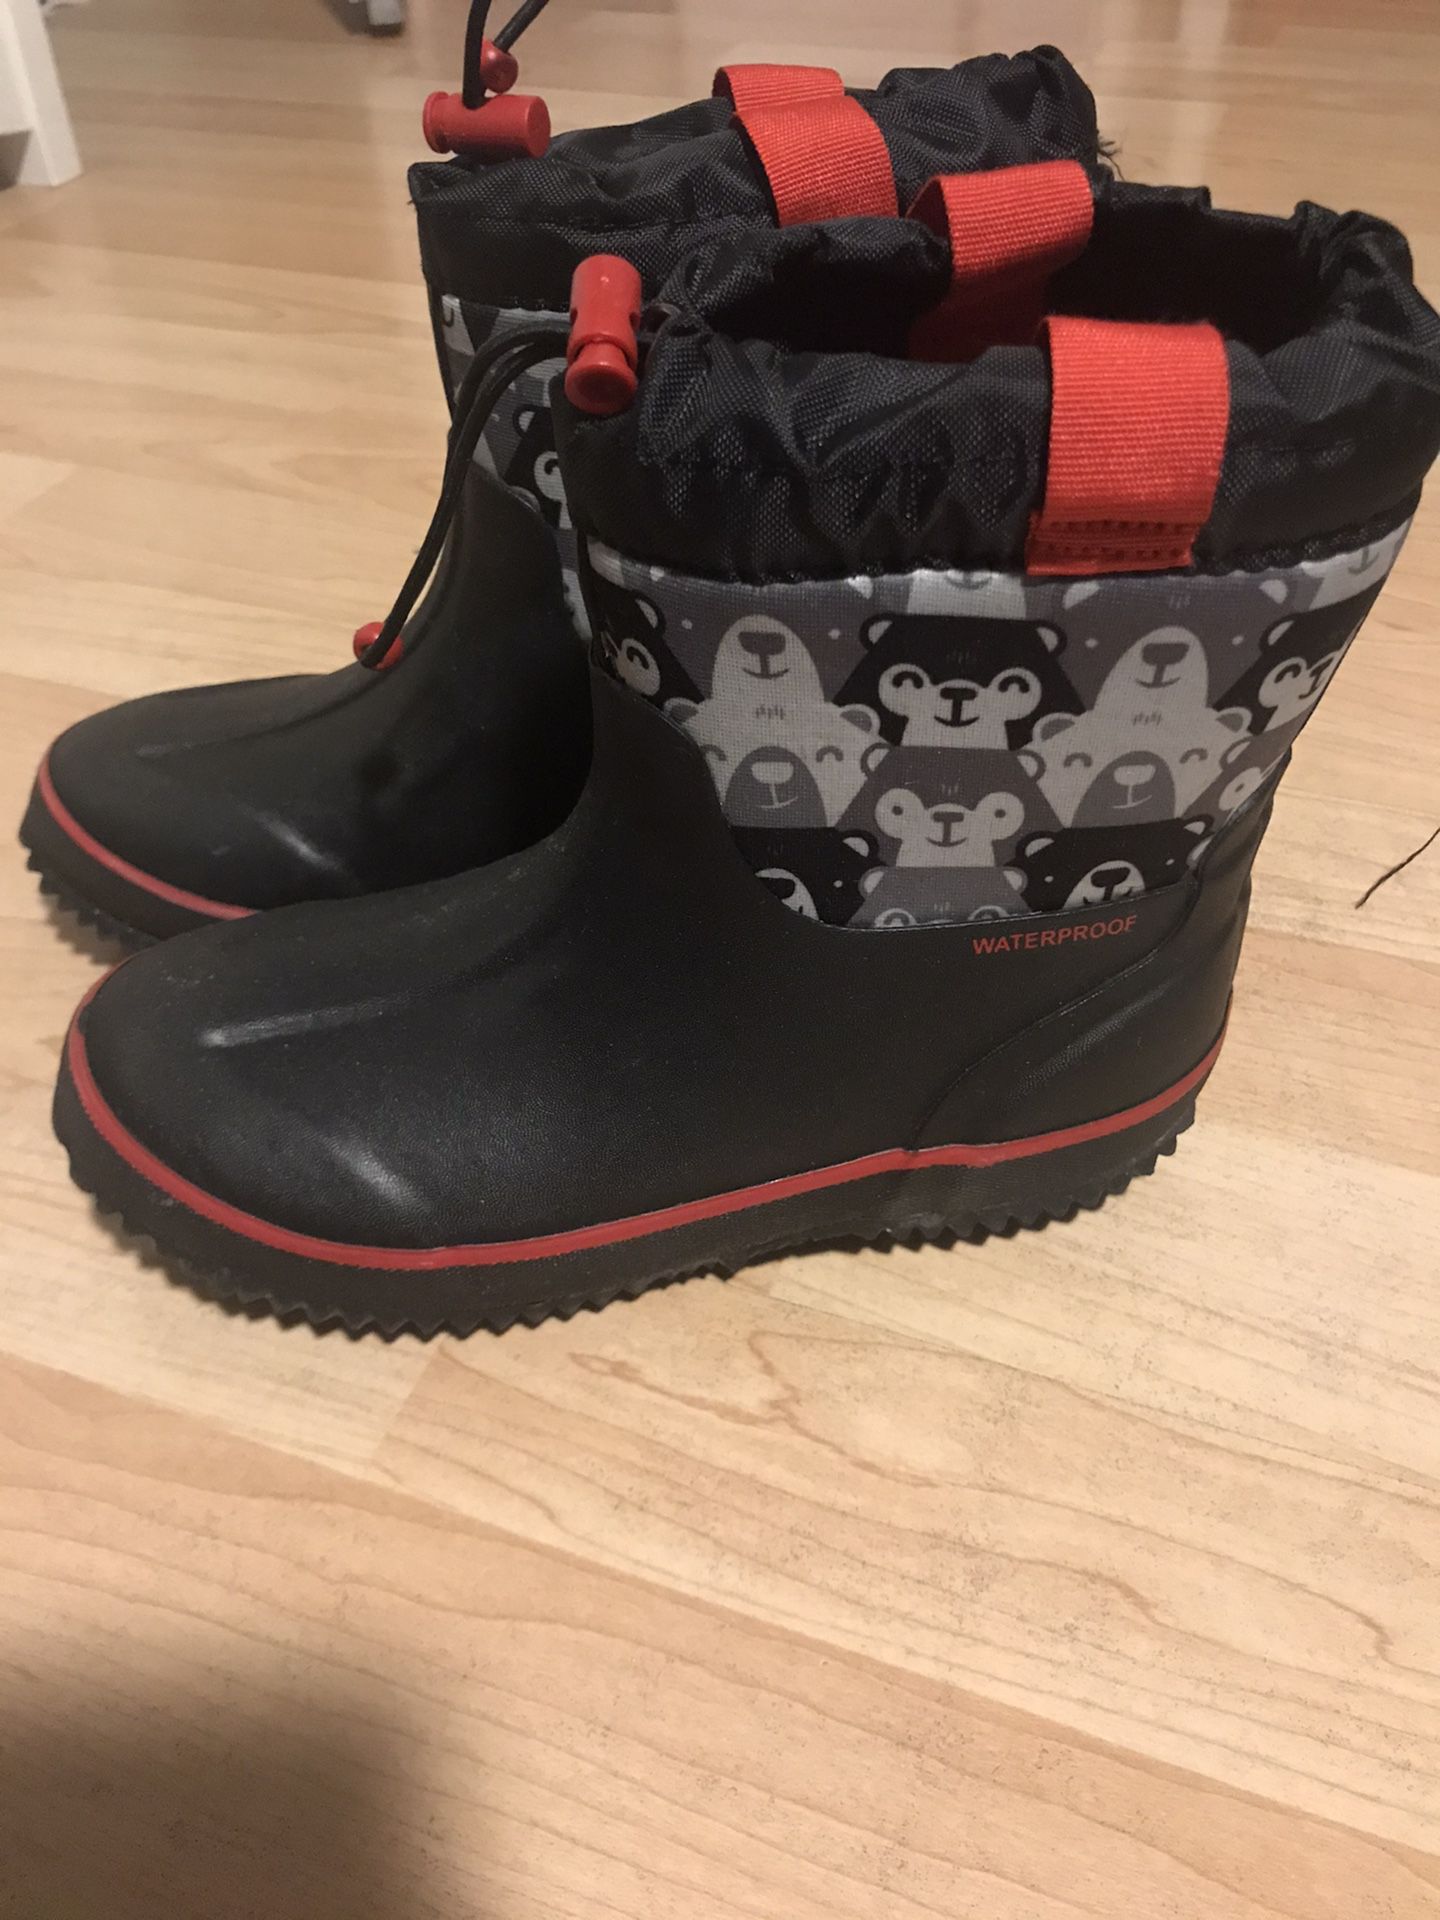 Size 11/12 rain or snow boots